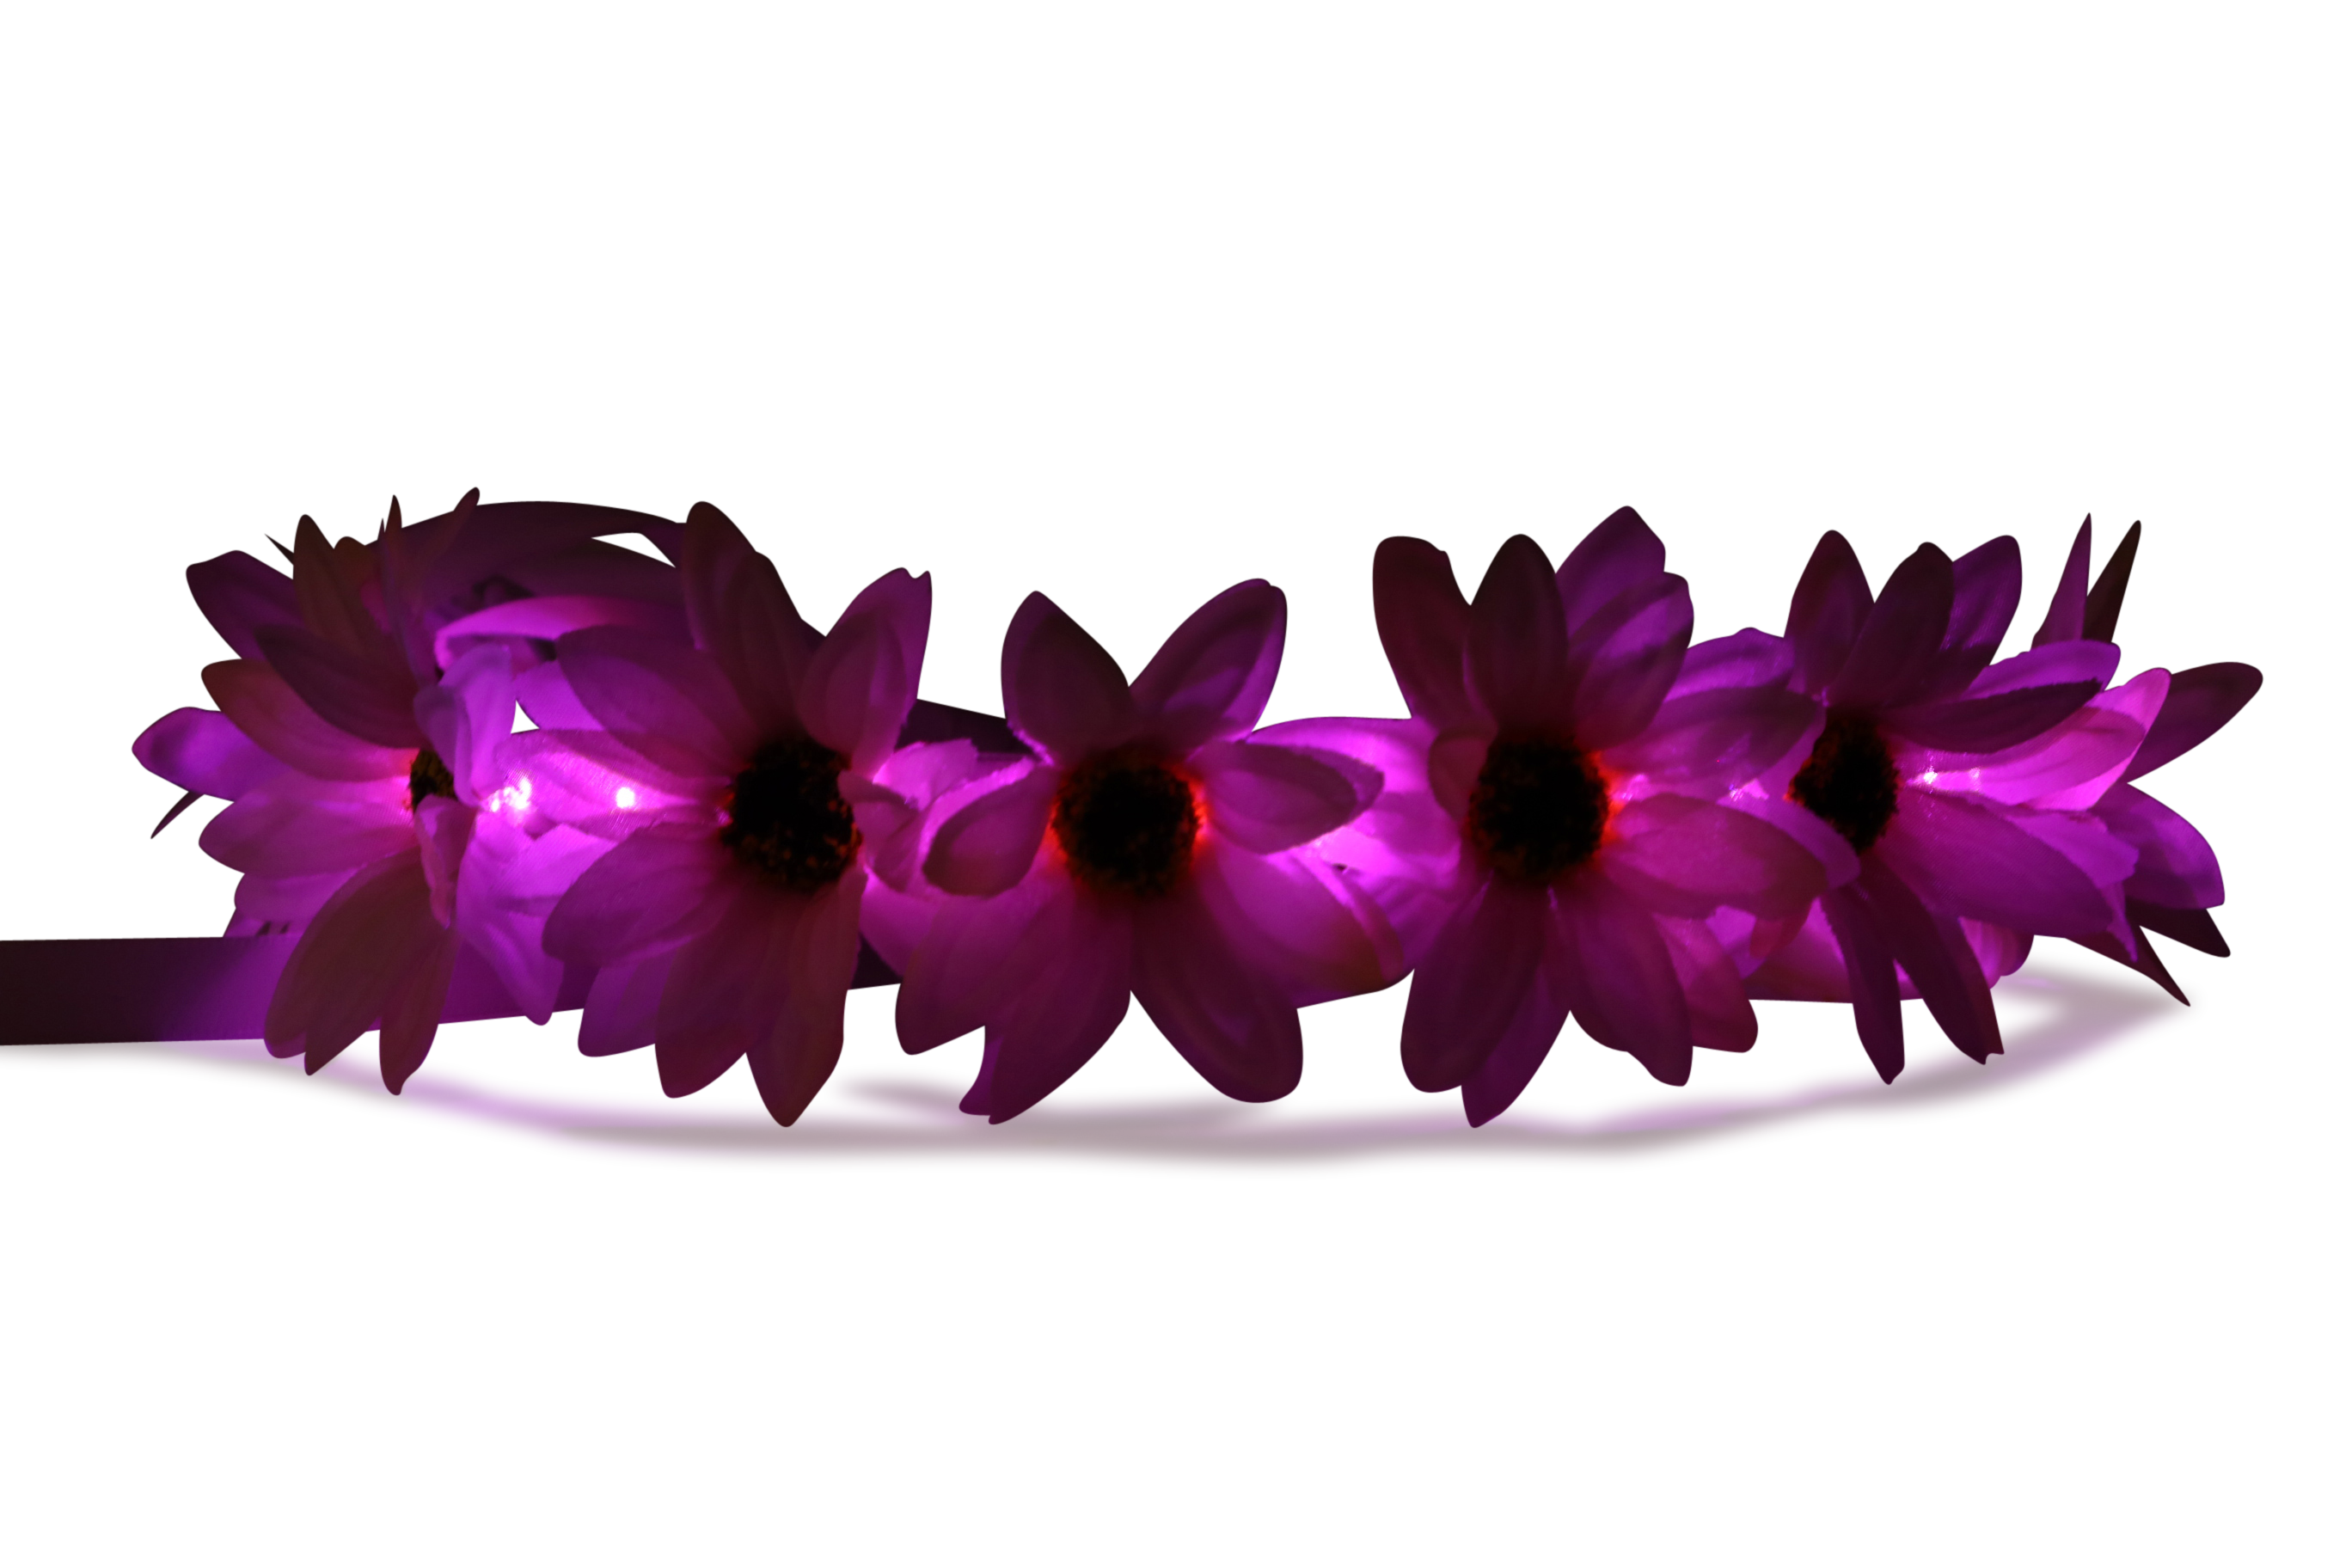  for free download. Rainbow flower crown png